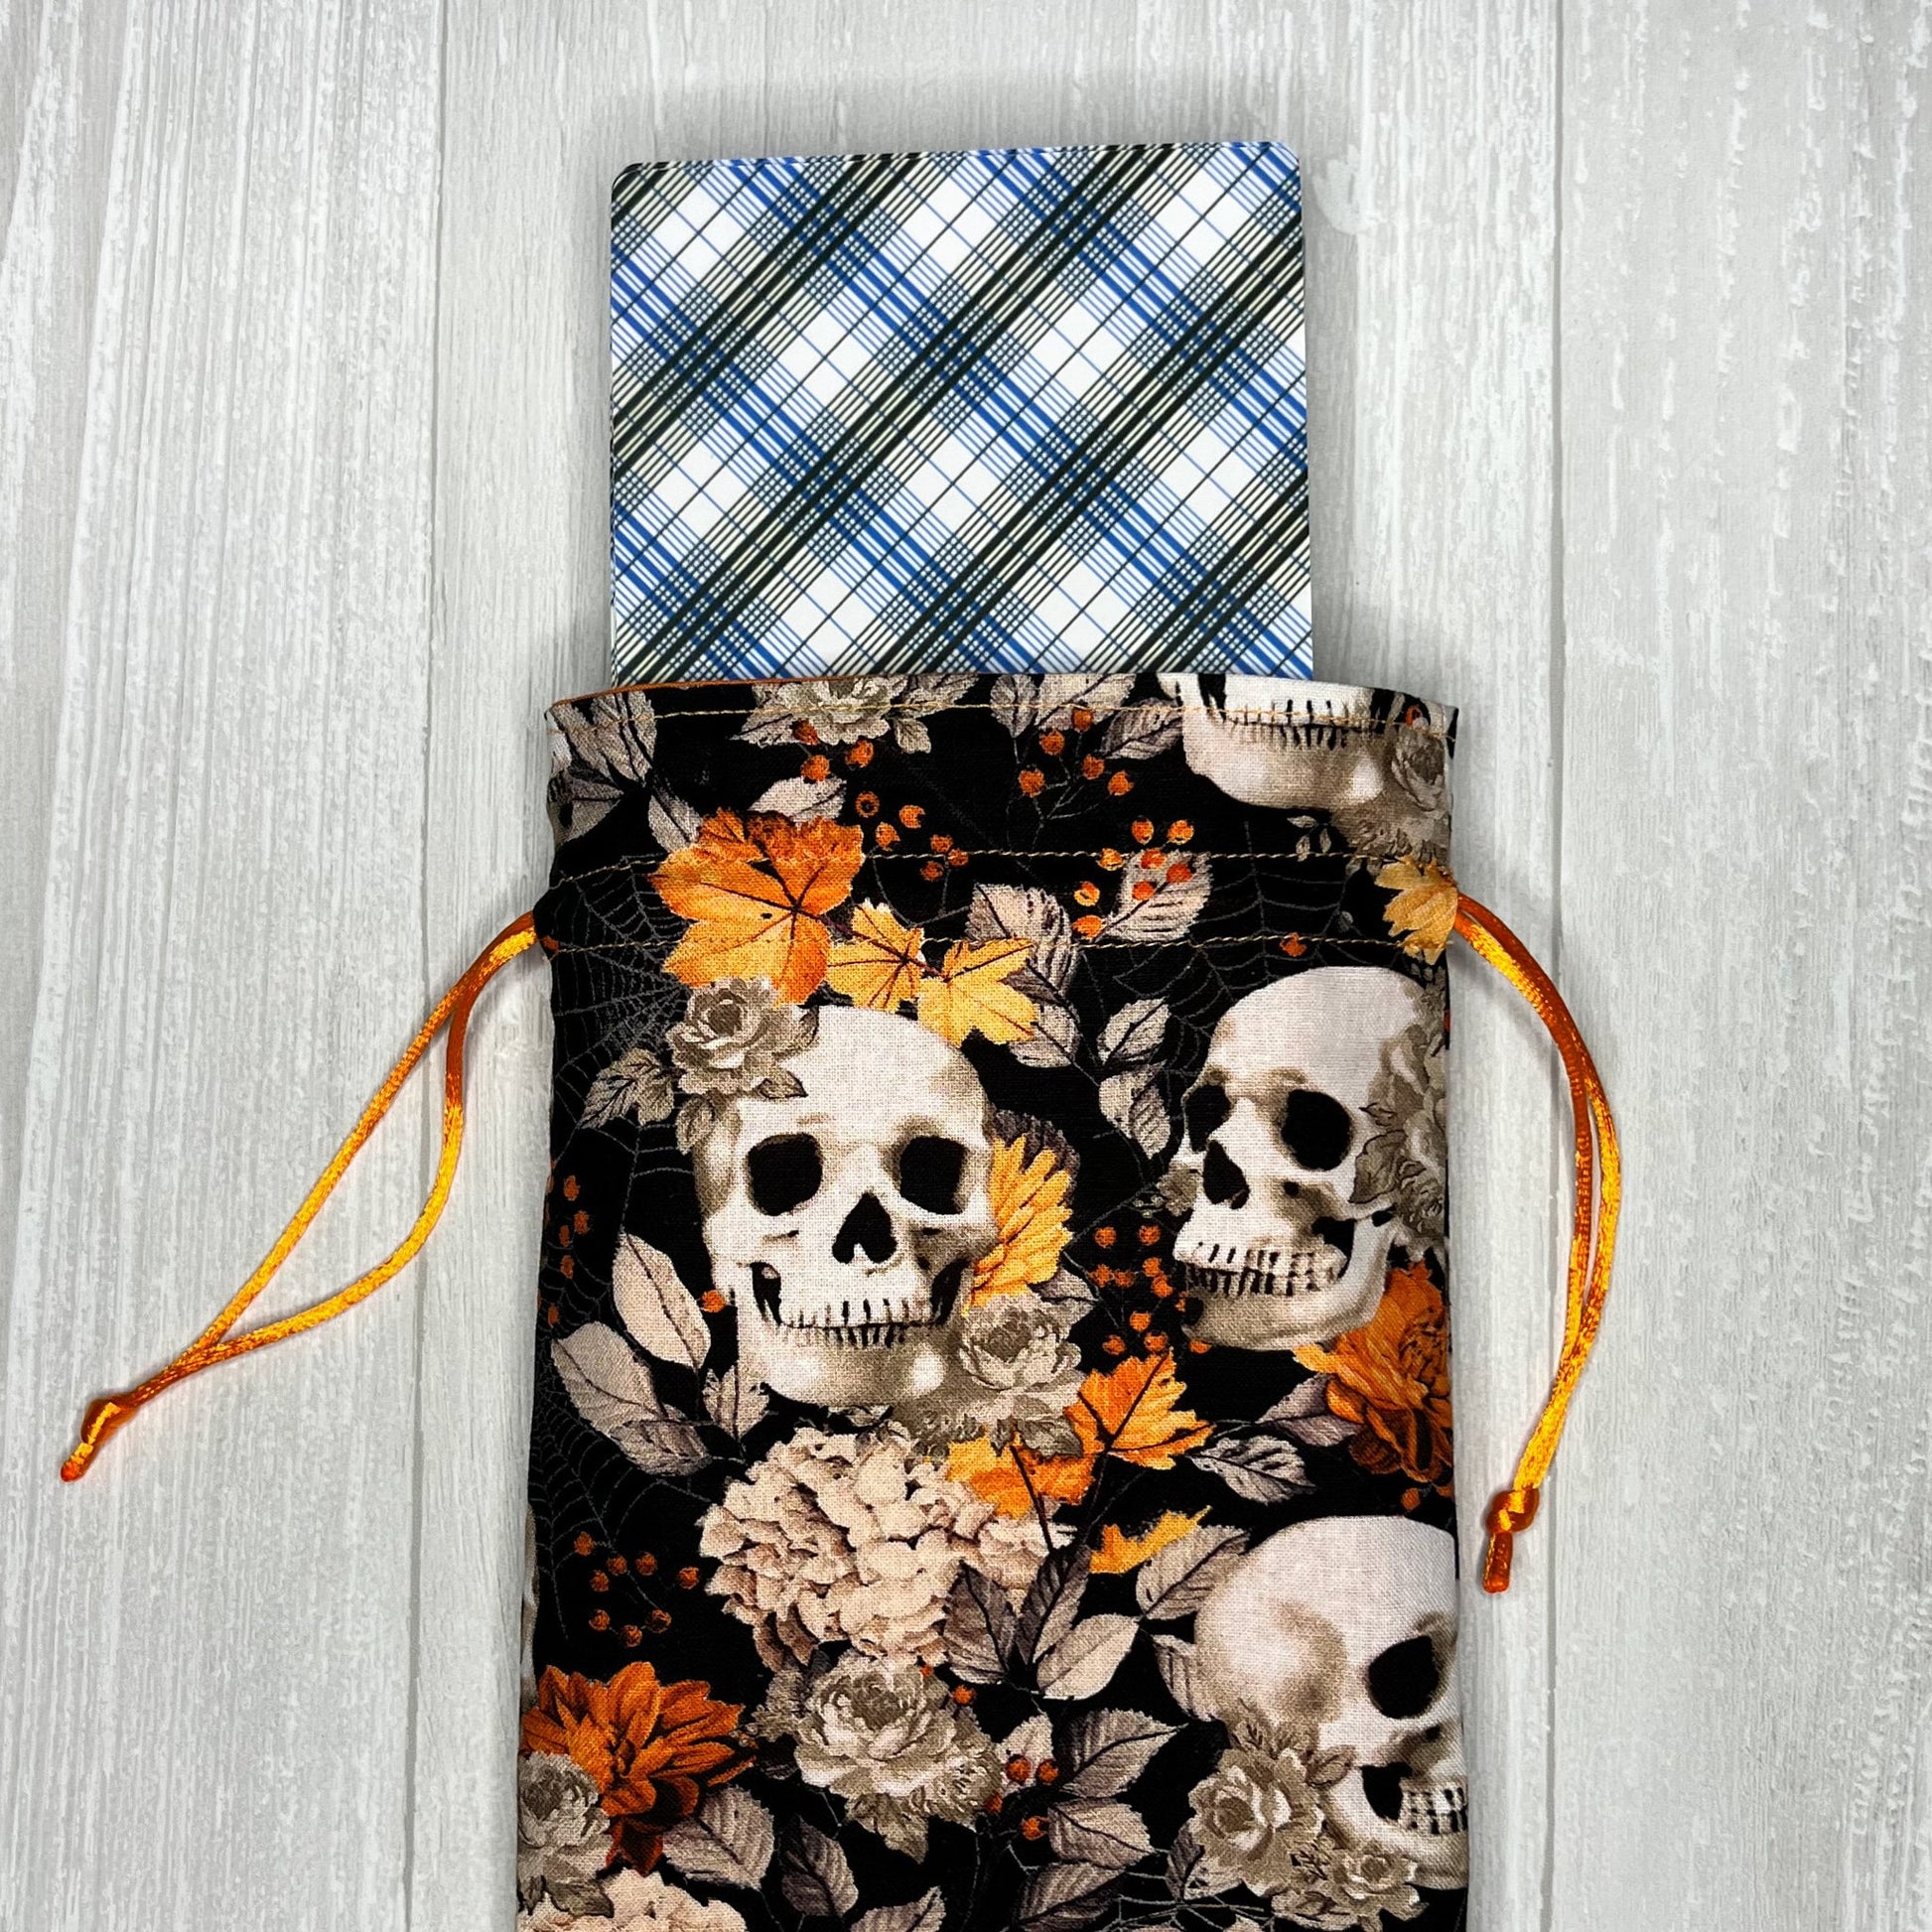 Large Skull Tarot Bag, Drawstring Pouch for Tarot & Oracle Deck, Divination Tools, Giant Tarot Deck, Witchcraft and Wiccan Gift Supplies